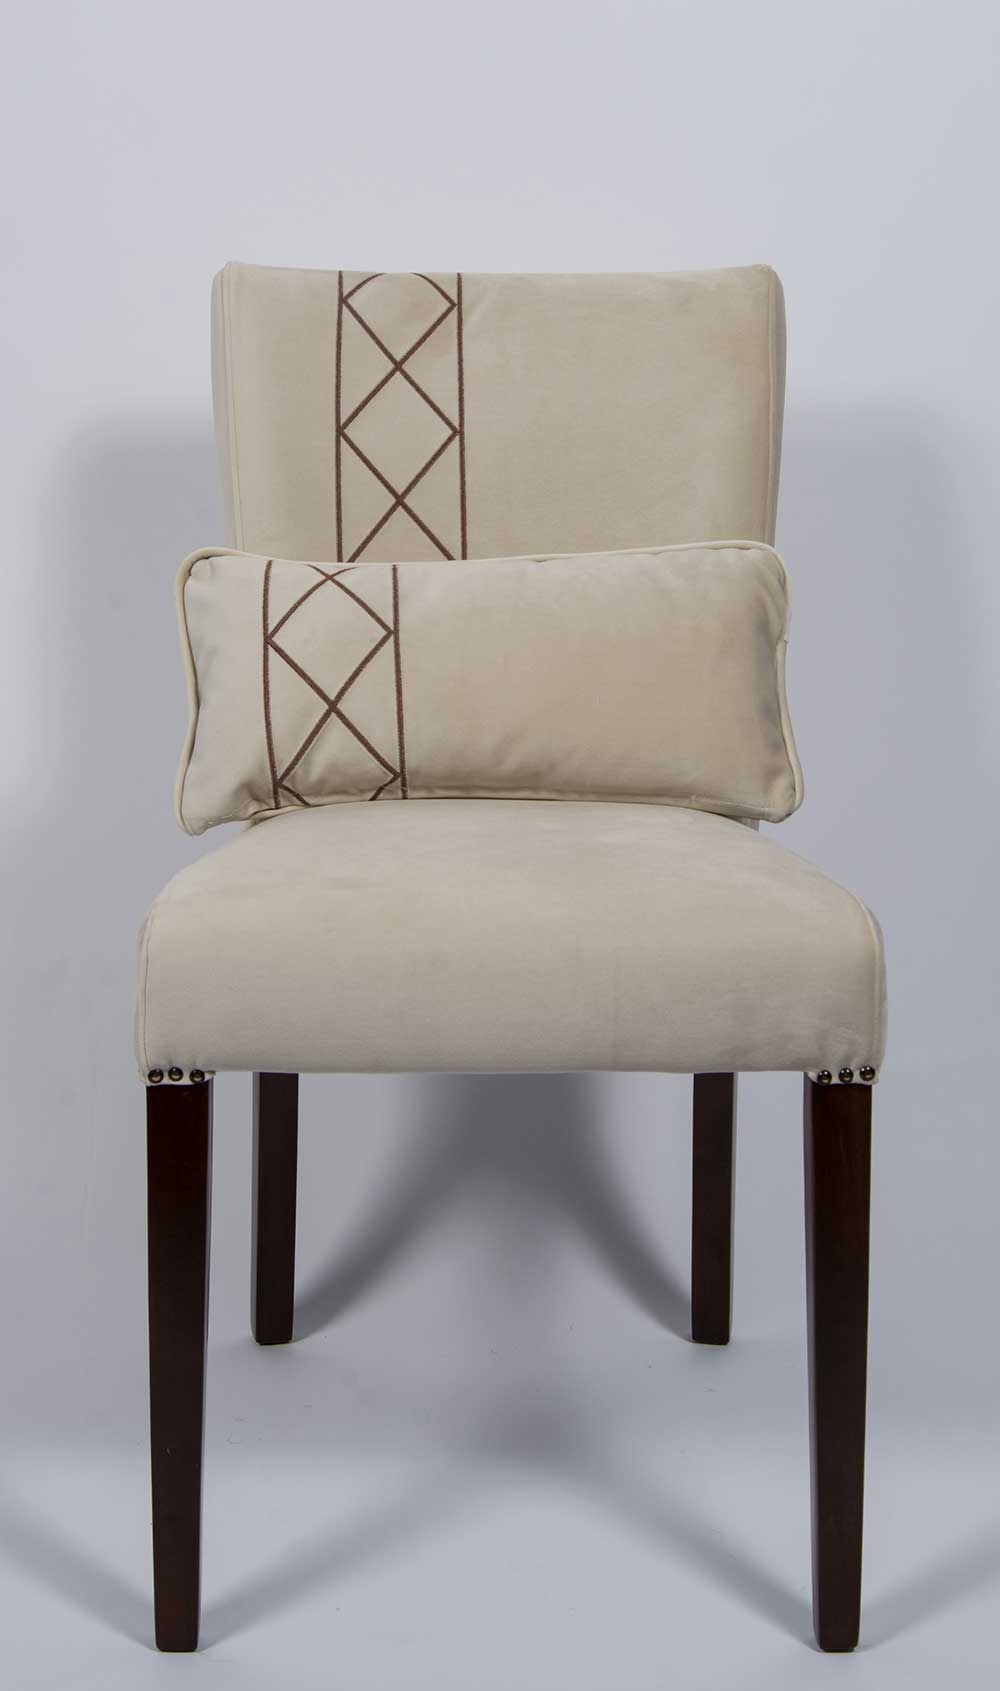 adorntextile-chair-embroidery3